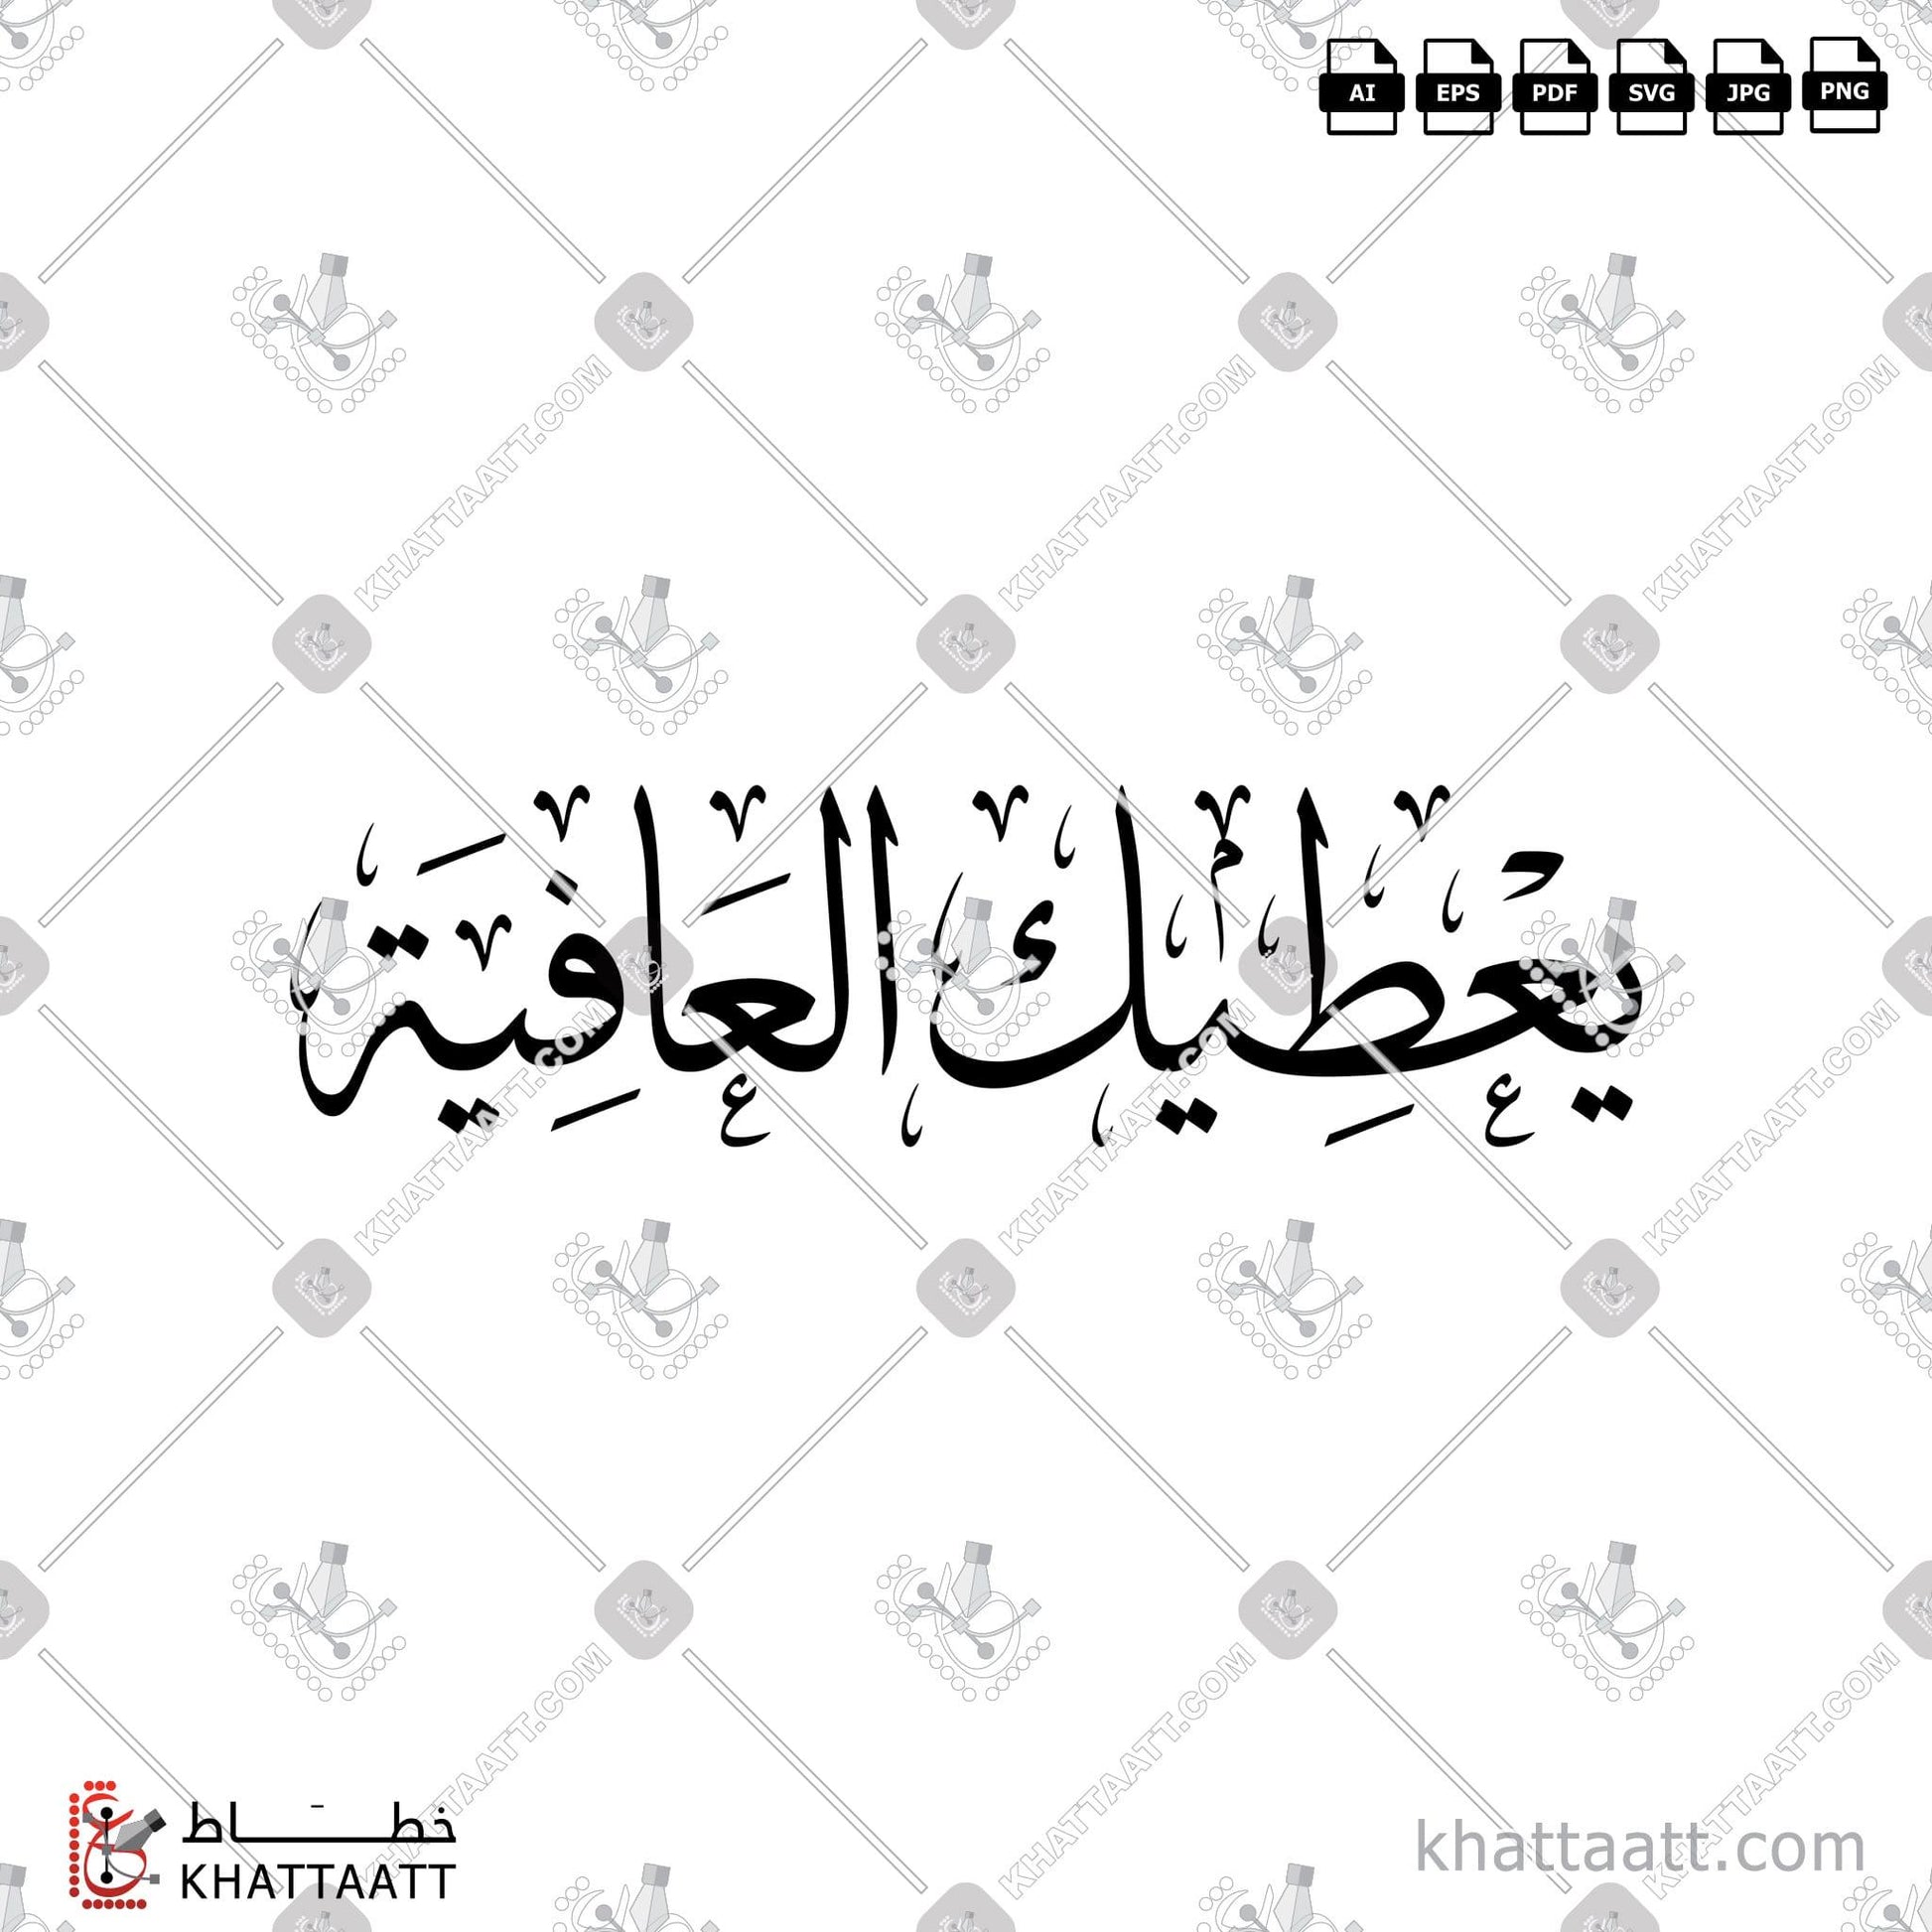 Download Arabic Calligraphy of يعطيك العافية in Thuluth - خط الثلث in vector and .png